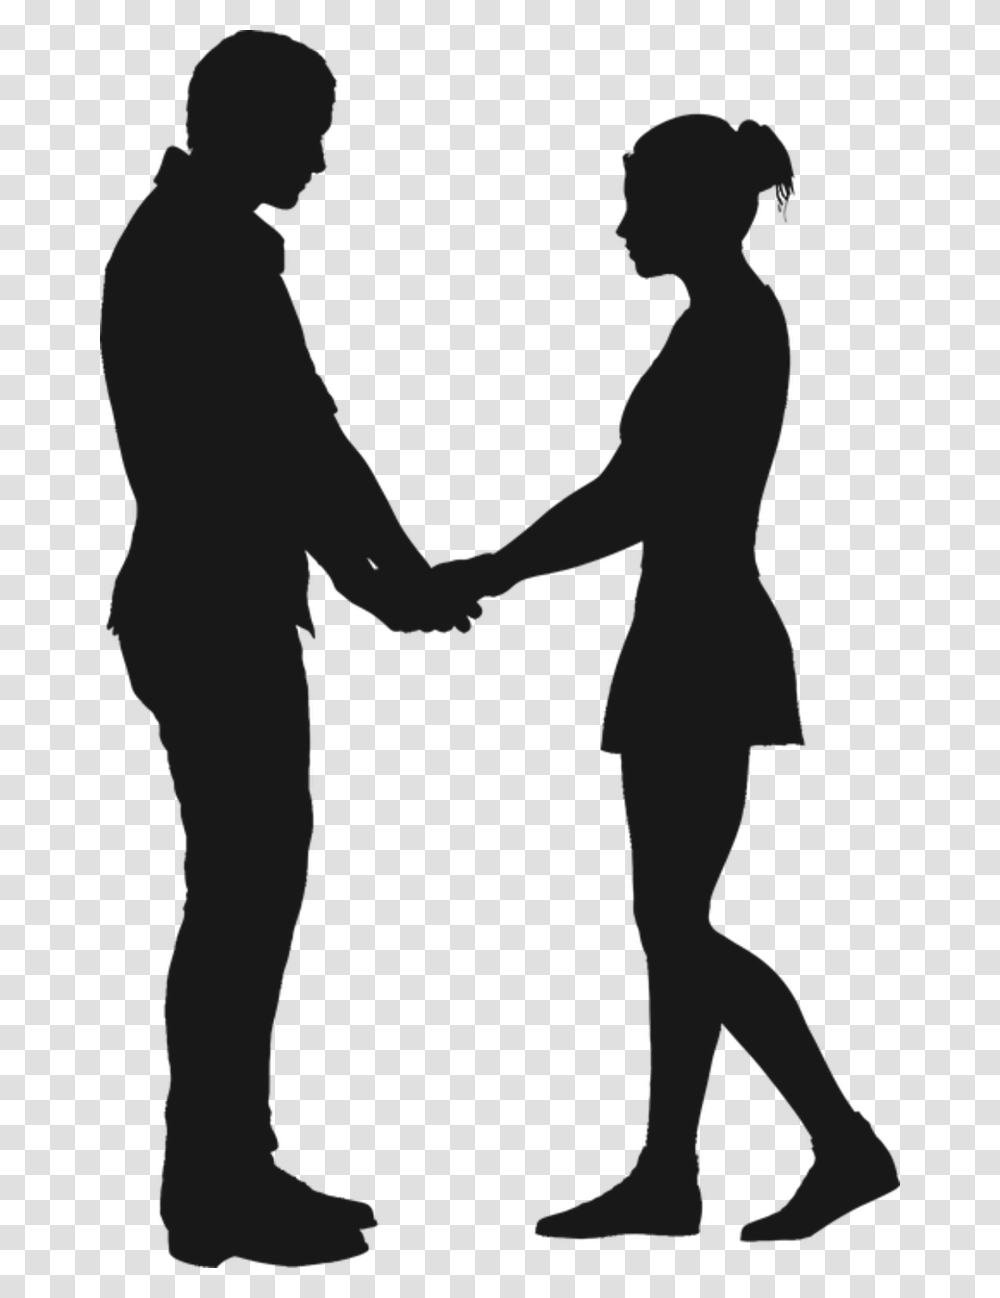 Boy 960 720 Silhouette Couple Holding Hands, Person, Stencil, Kneeling, Balance Beam Transparent Png